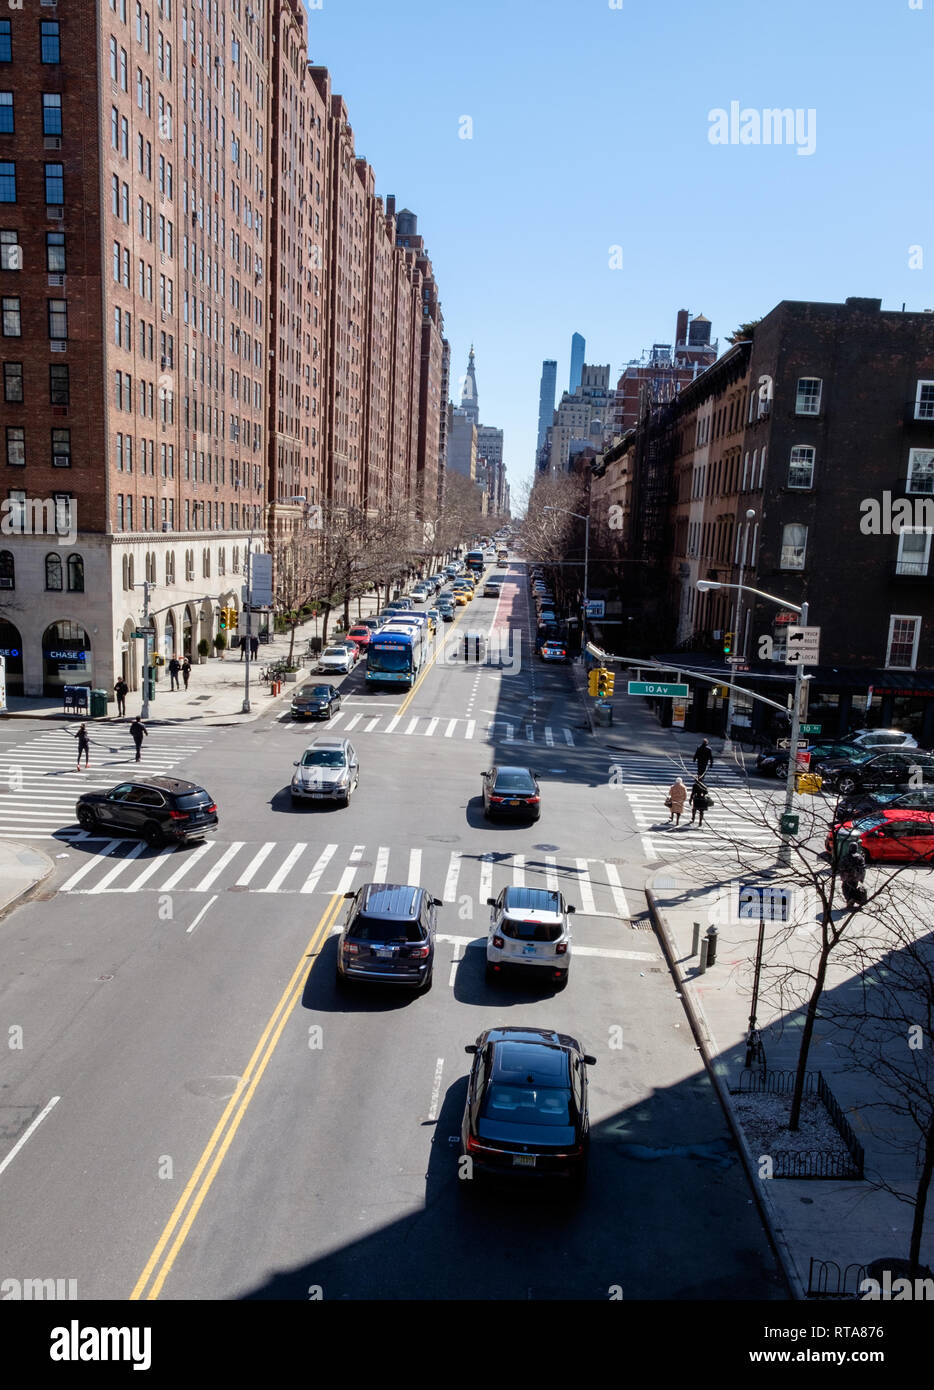 View looking north over 10th Avenue & 23rd Street, Chelsea, from High Line Park in New York City. Mar 18, 2018 Stock Photo